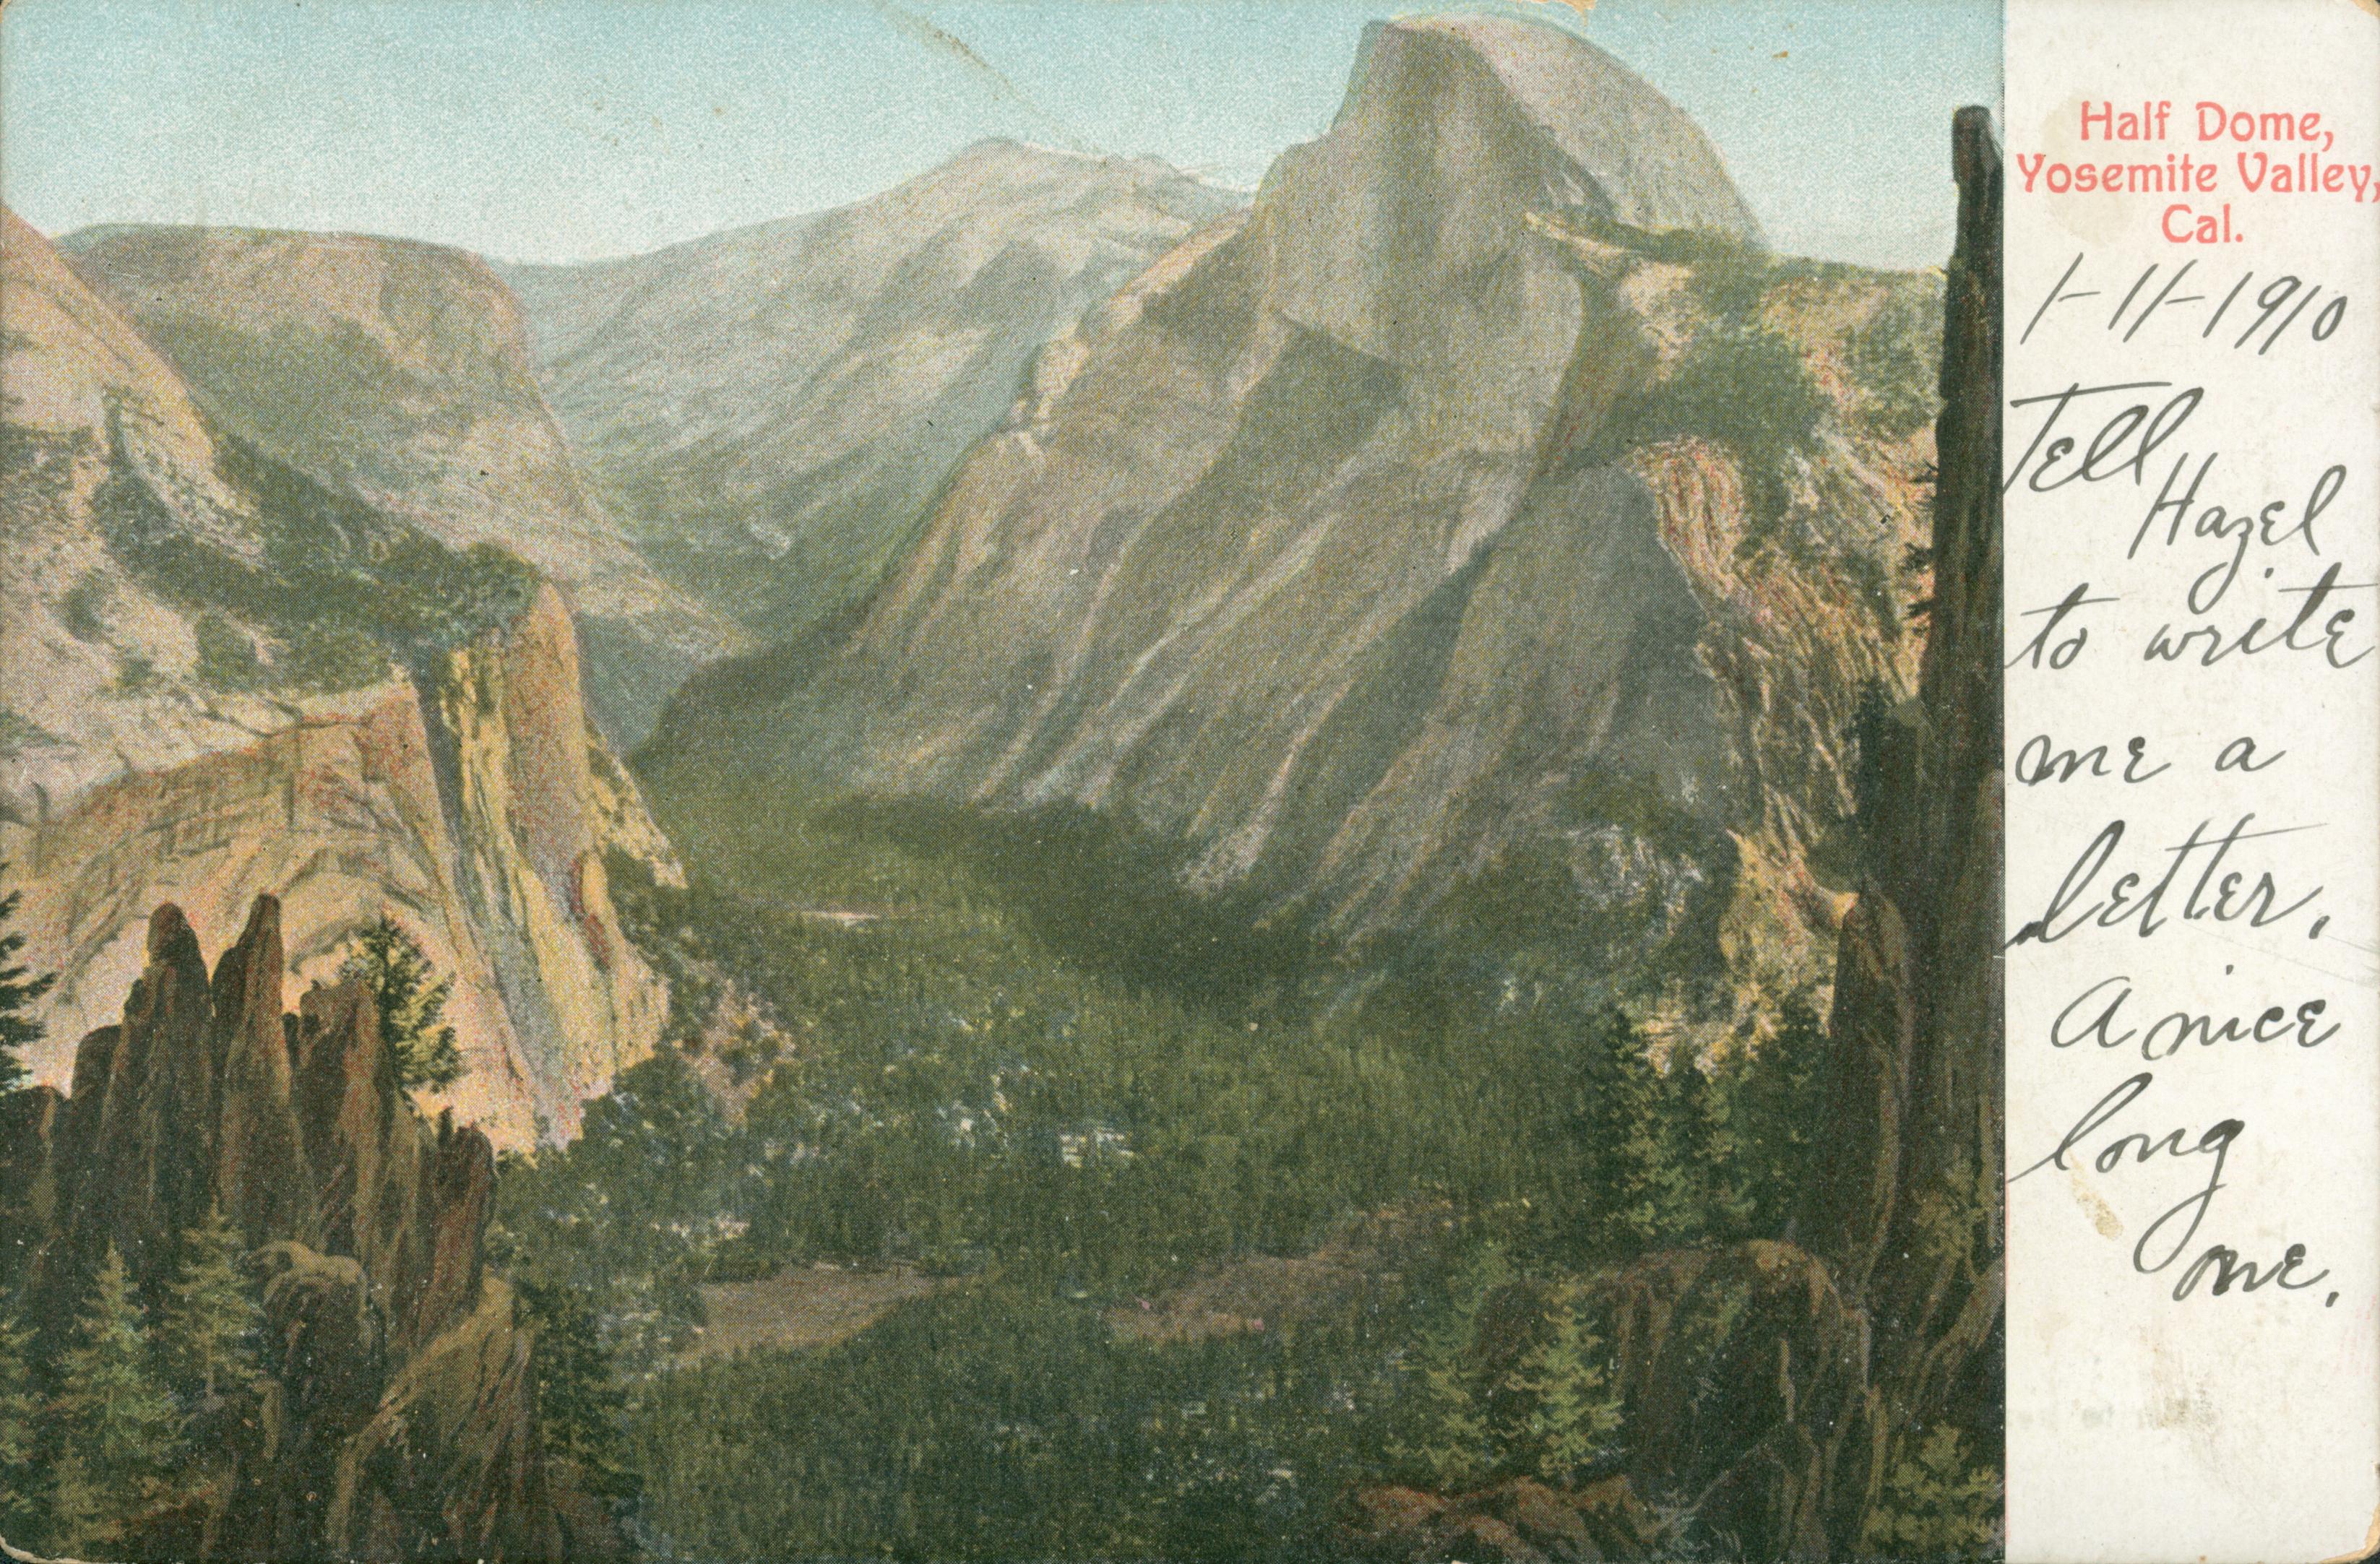 Shows Half Dome looming above Yosemite Valley